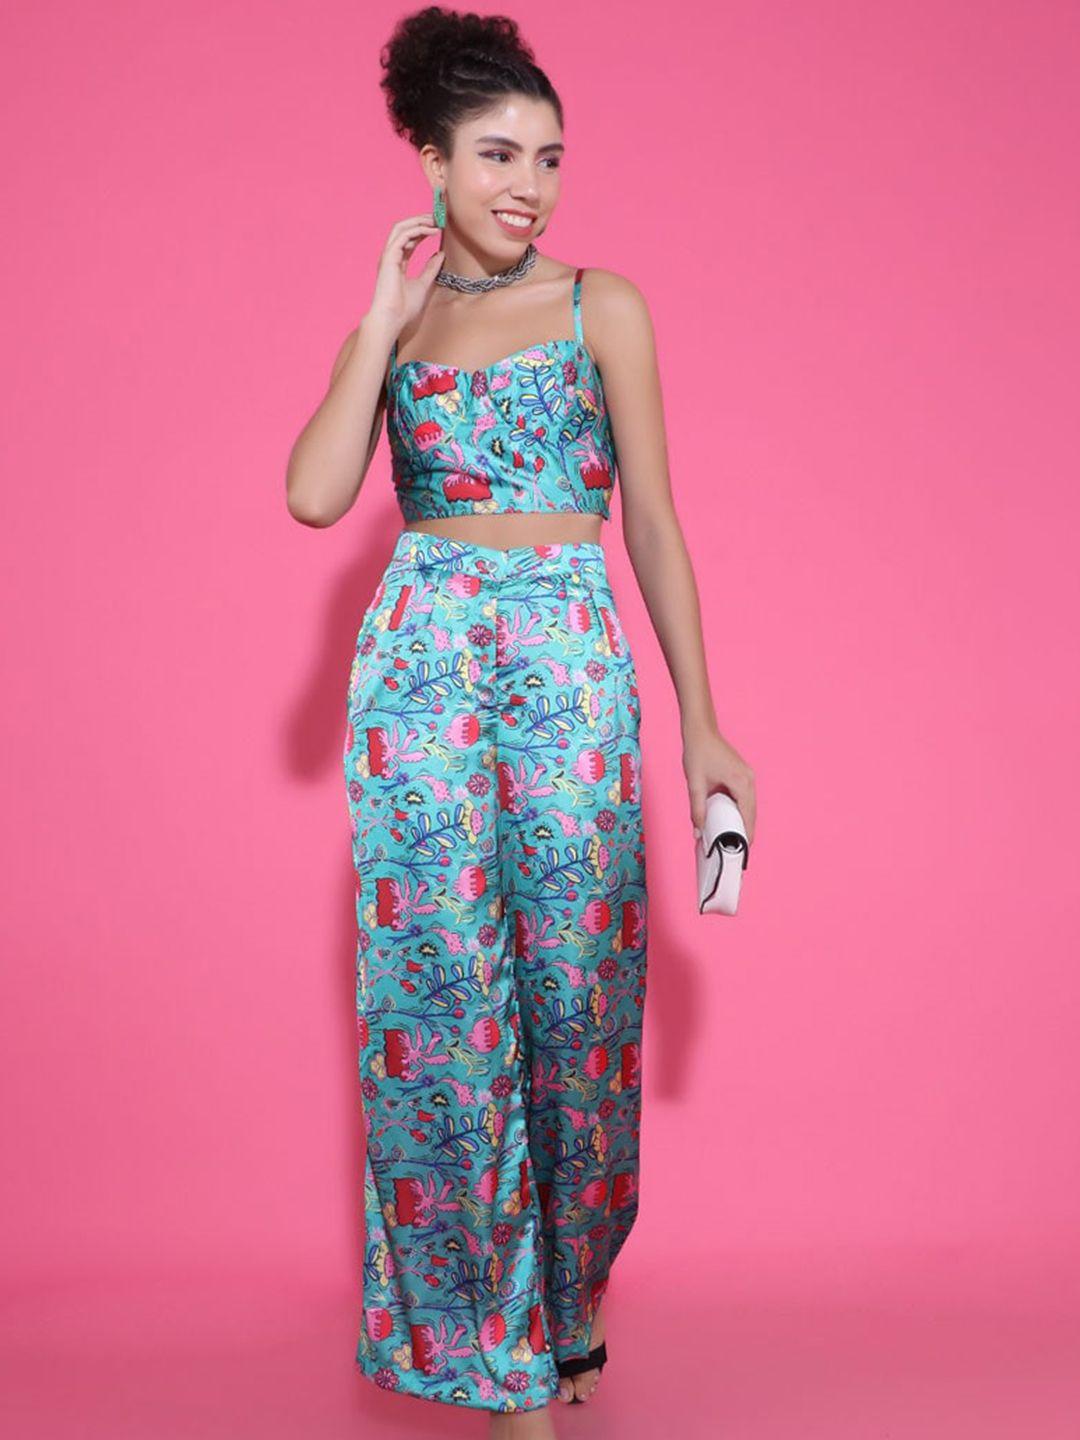 stylecast x hersheinbox floral printed crop top and trousers set